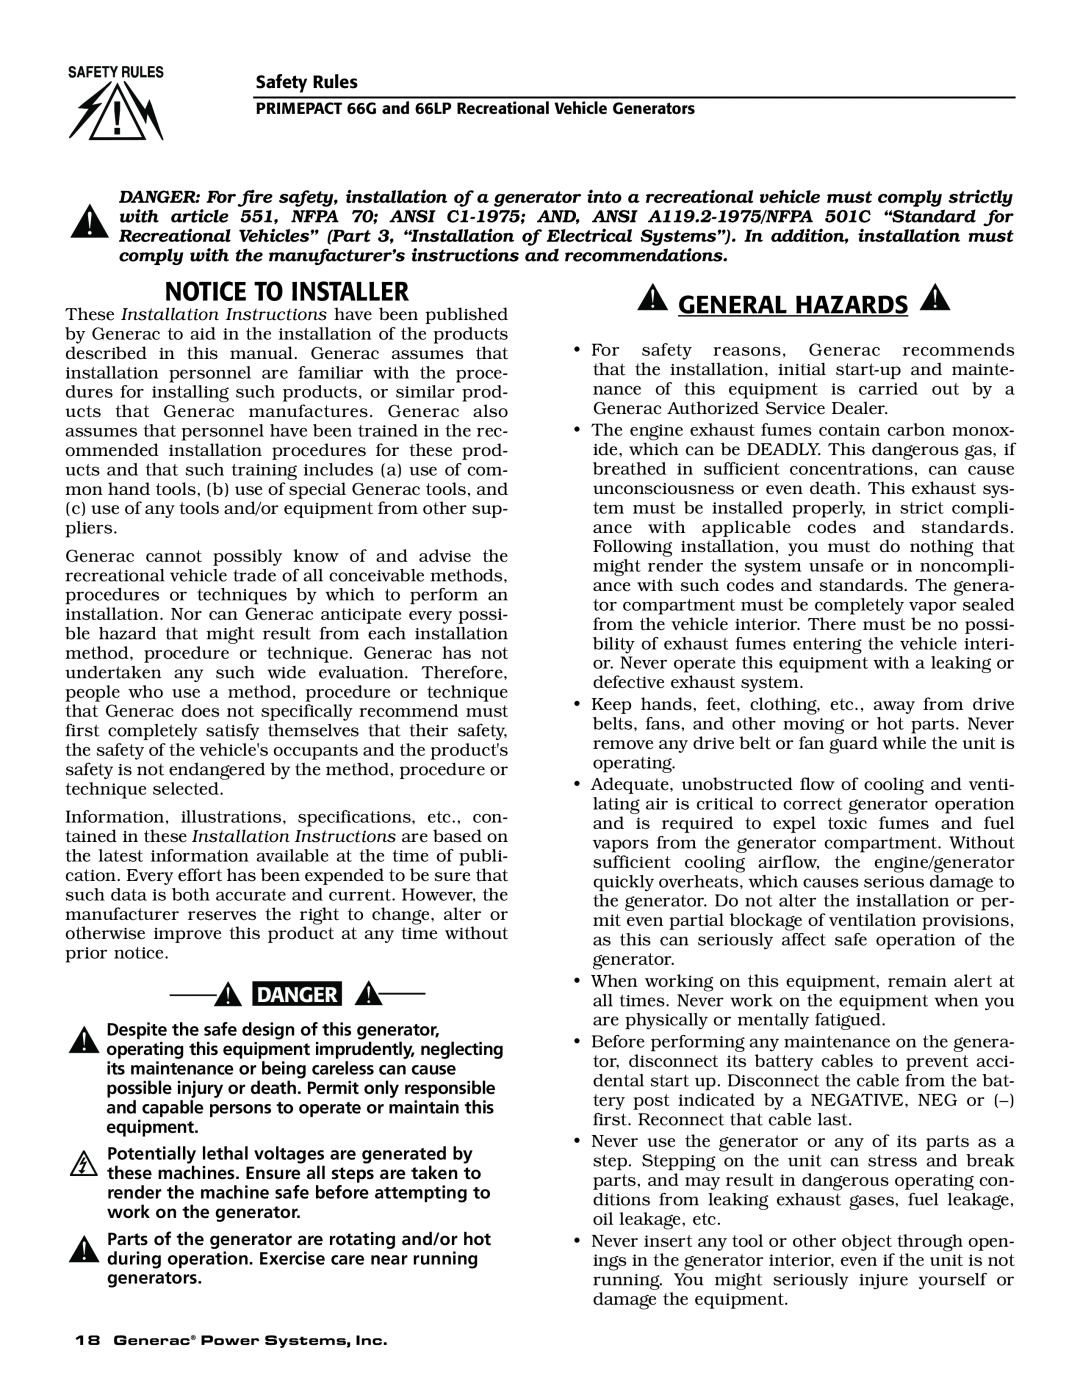 Generac Power Systems 009600-5, 009734-5 owner manual Notice To Installer, General Hazards 